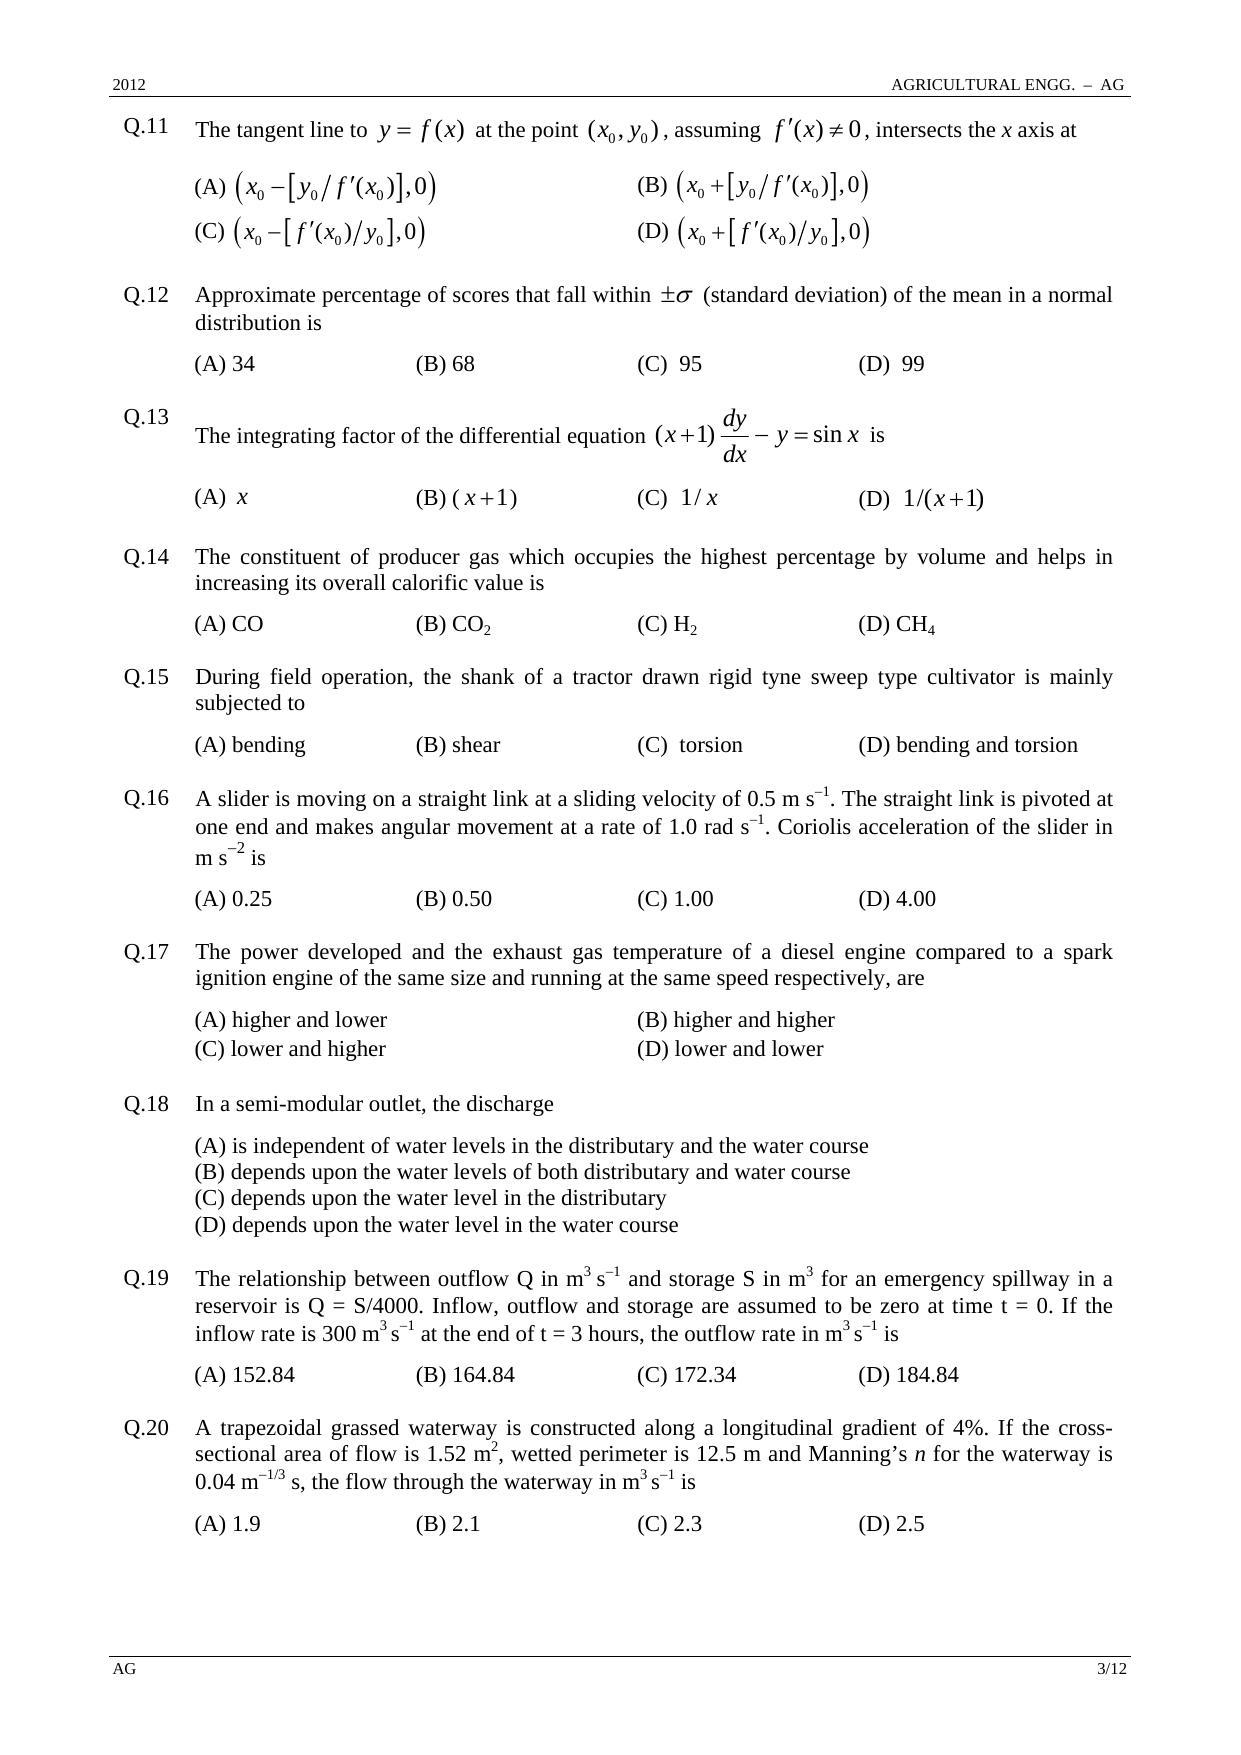 GATE 2012 Agricultural Engineering (AG) Question Paper with Answer Key - Page 3